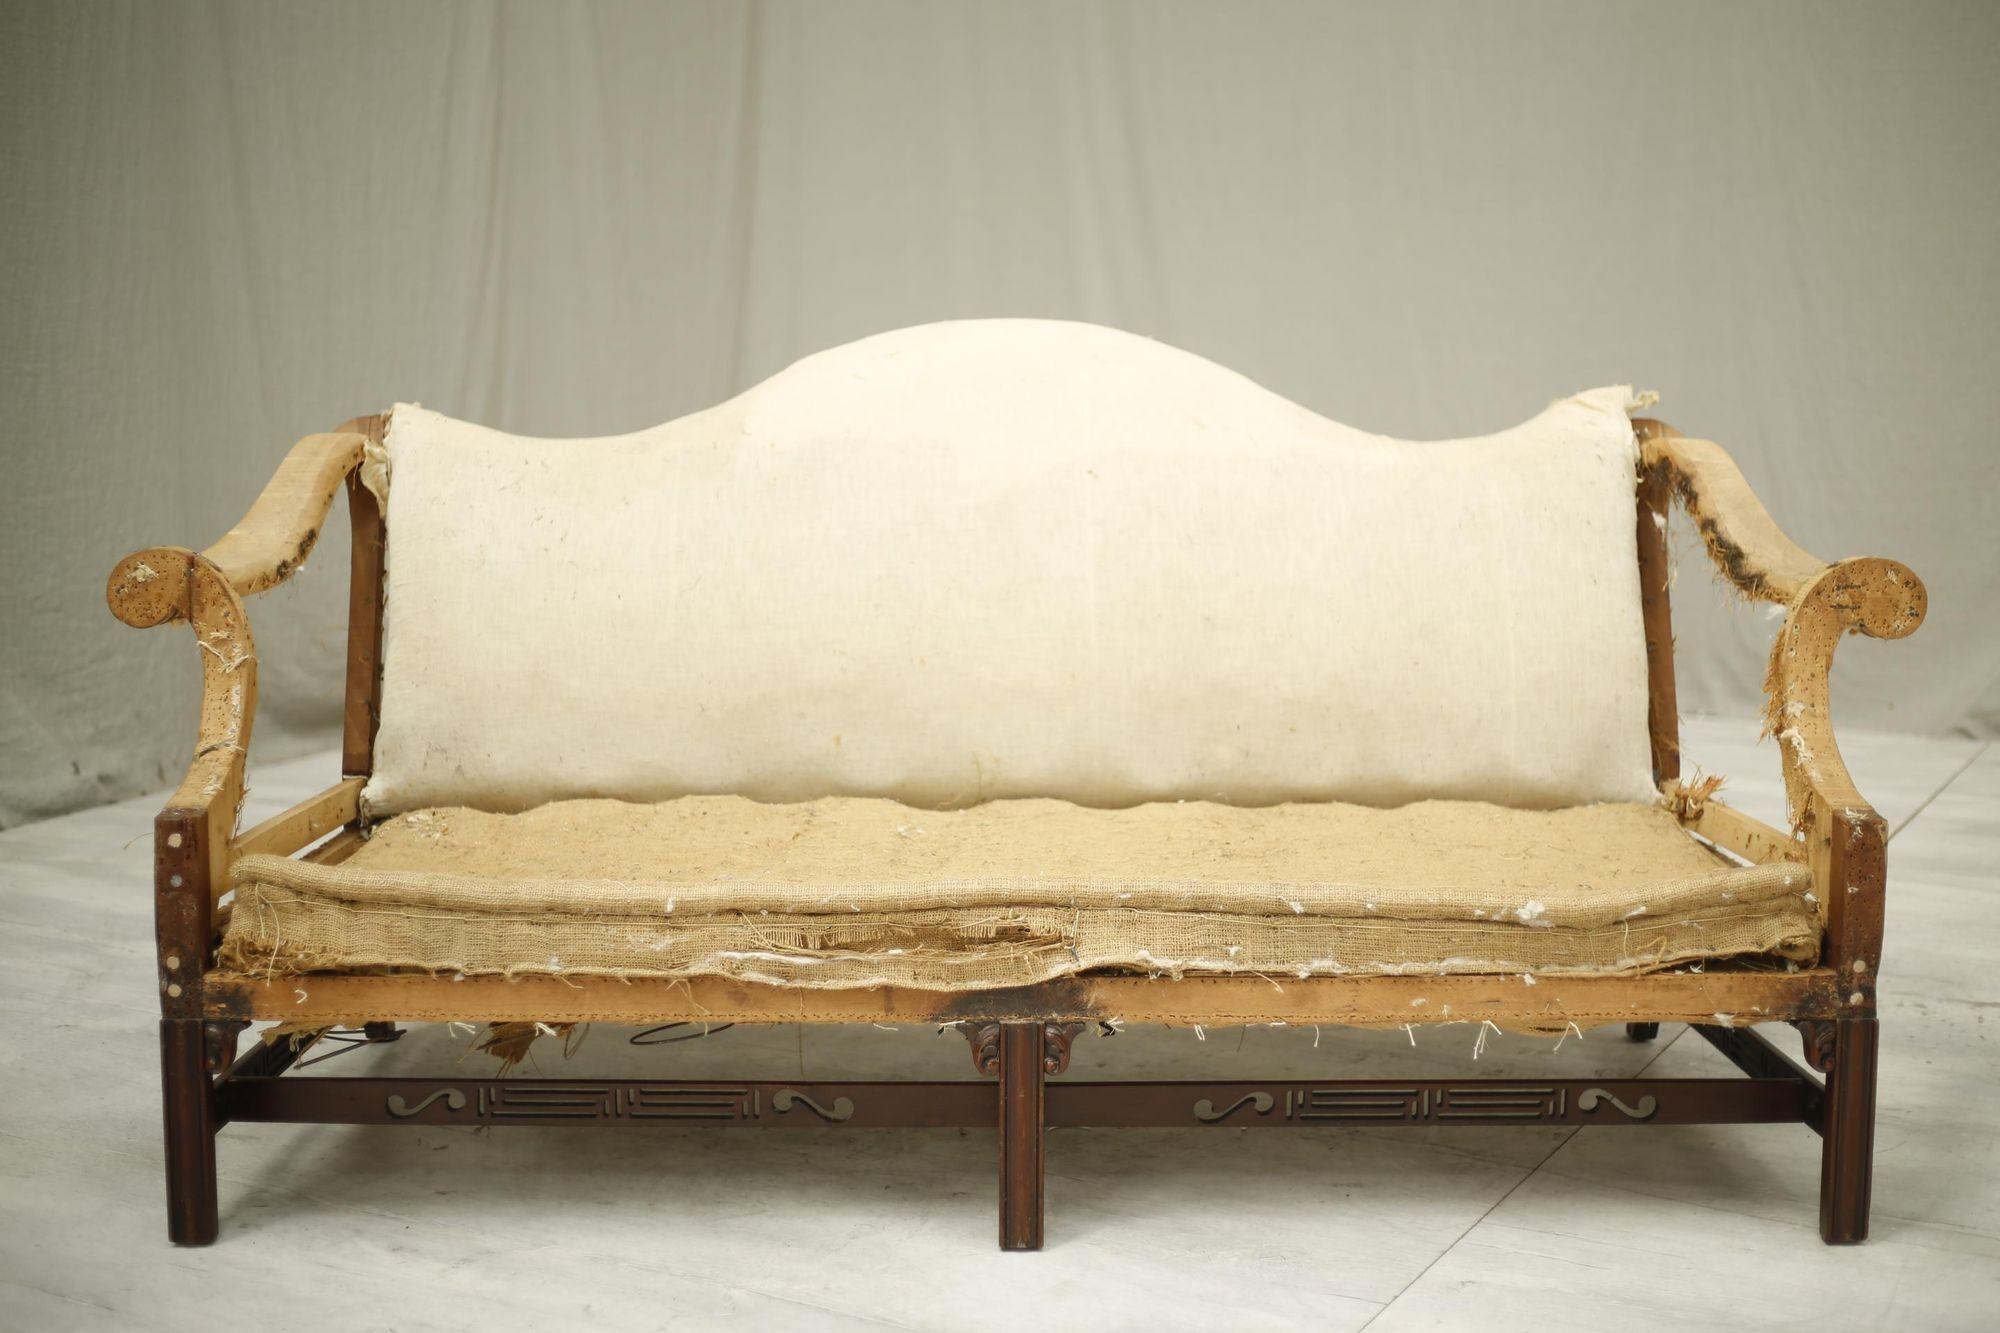 20th Century American c.1930's Camel Backed Sofa with Fret Work Stretcher For Sale